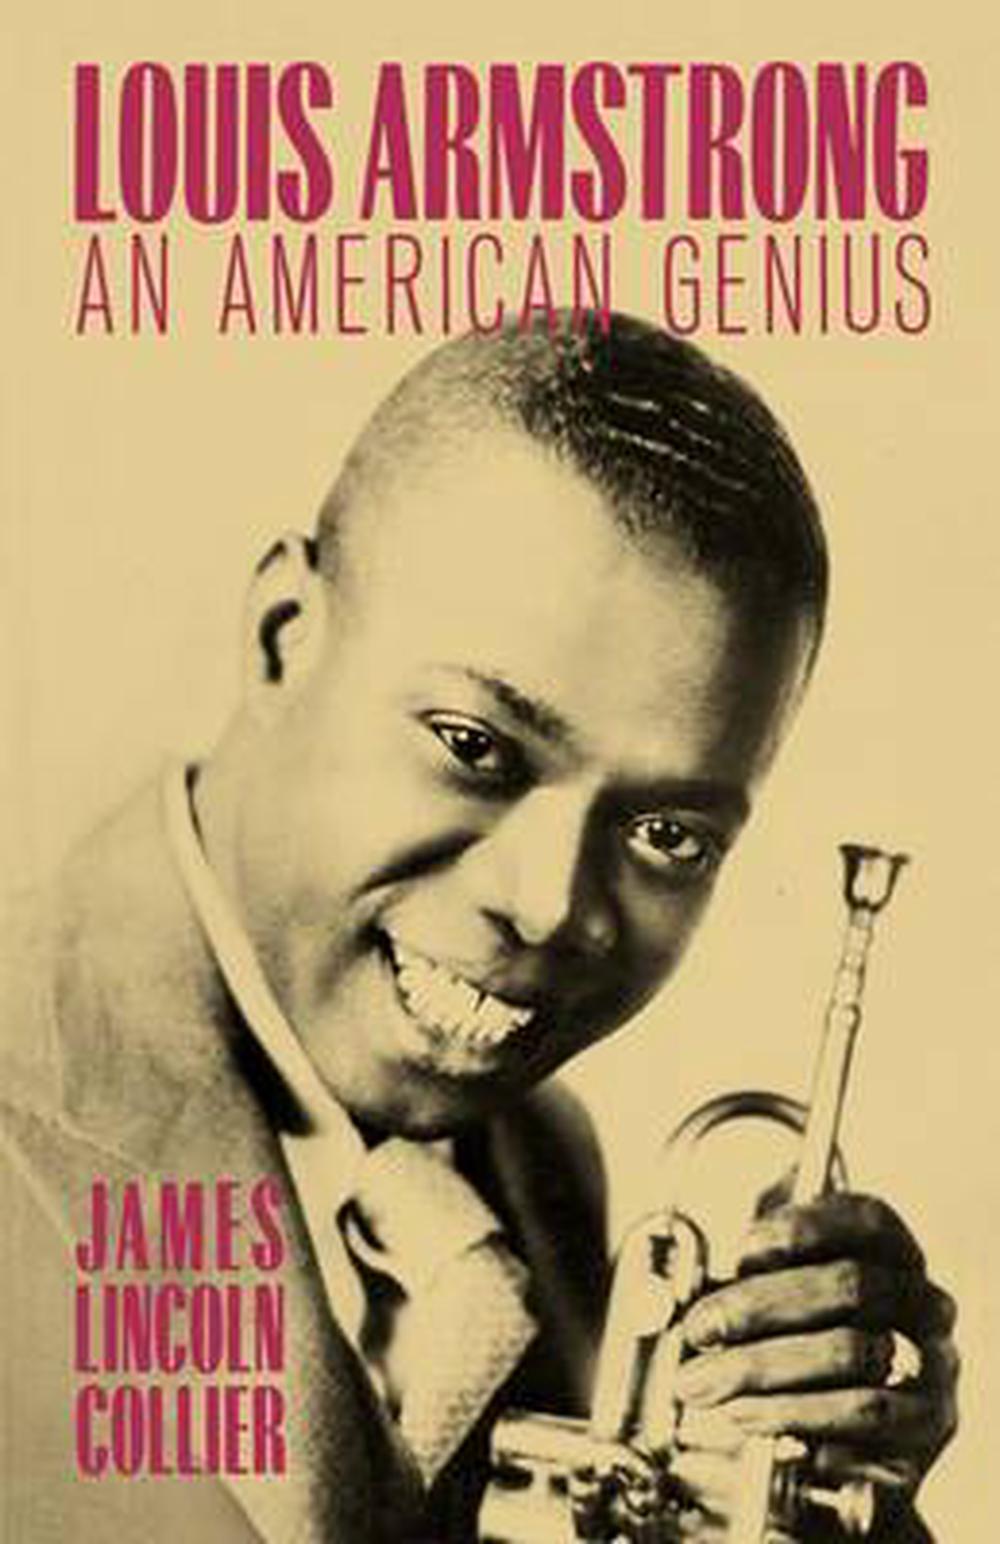 Louis Armstrong: An American Genius by James Lincoln Collier (English) Paperback 9780195037272 ...